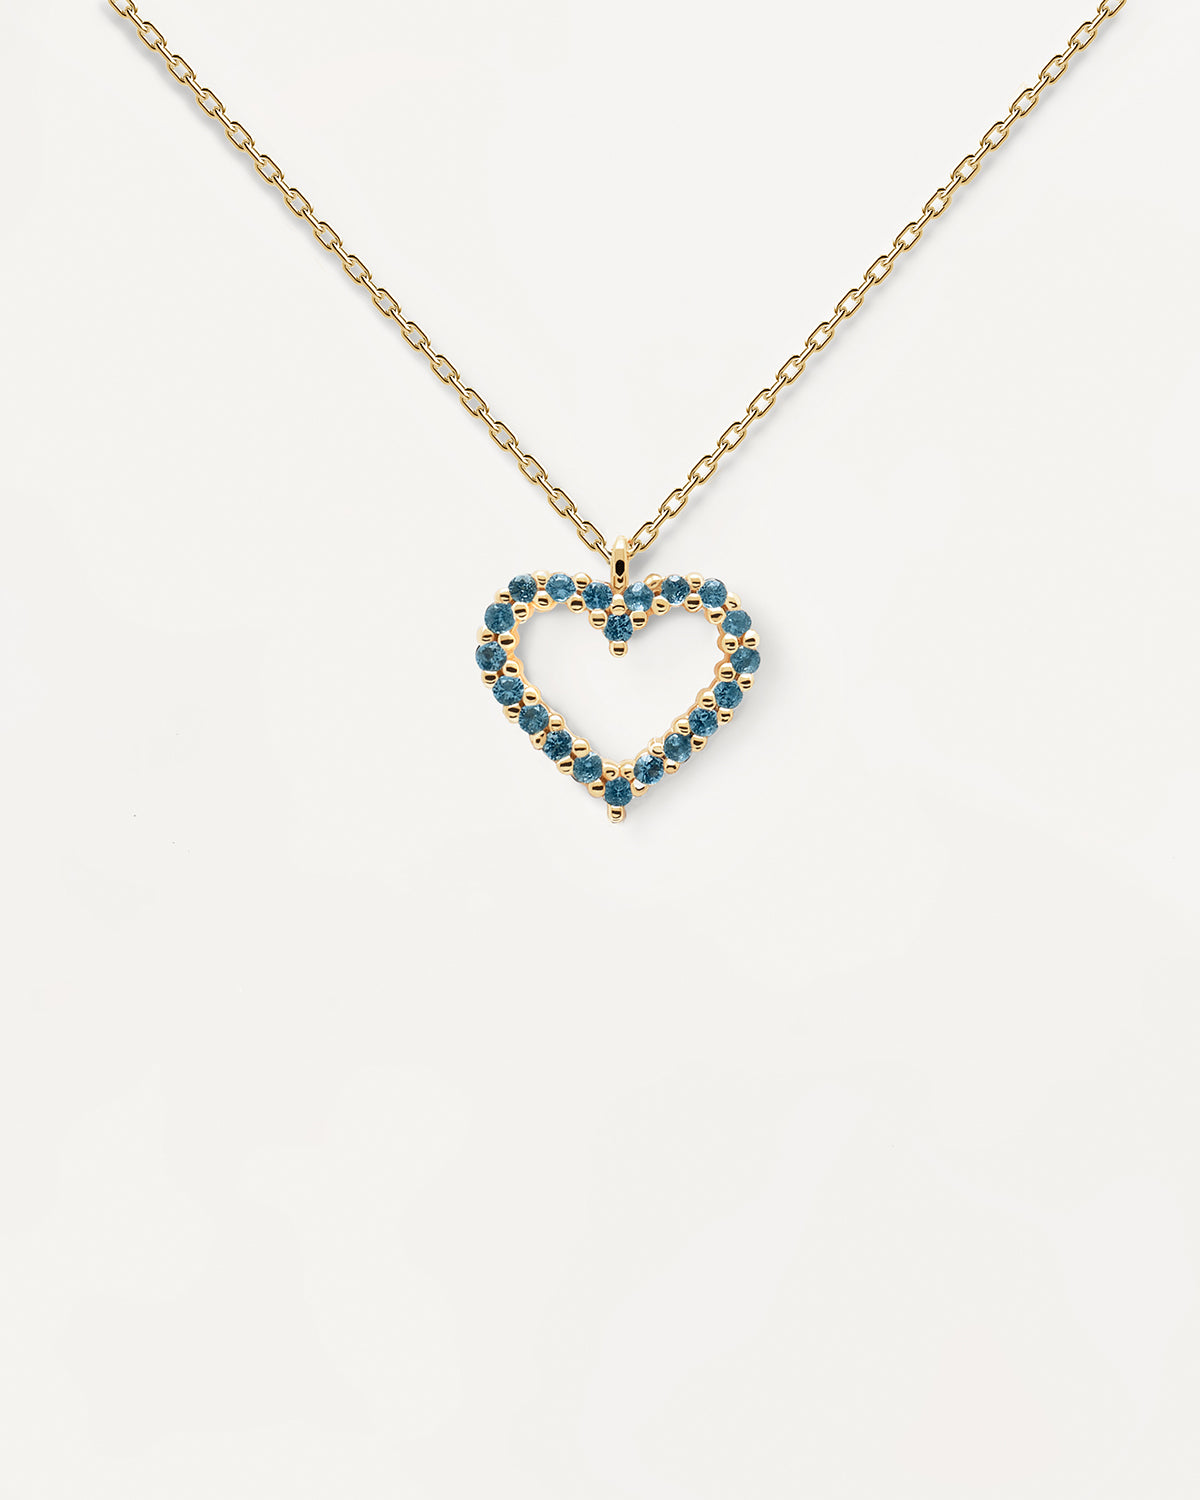 2023 Selection | Celeste Heart Necklace Gold. Get the latest arrival from PDPAOLA. Place your order safely and get this Best Seller. Free Shipping over 40€